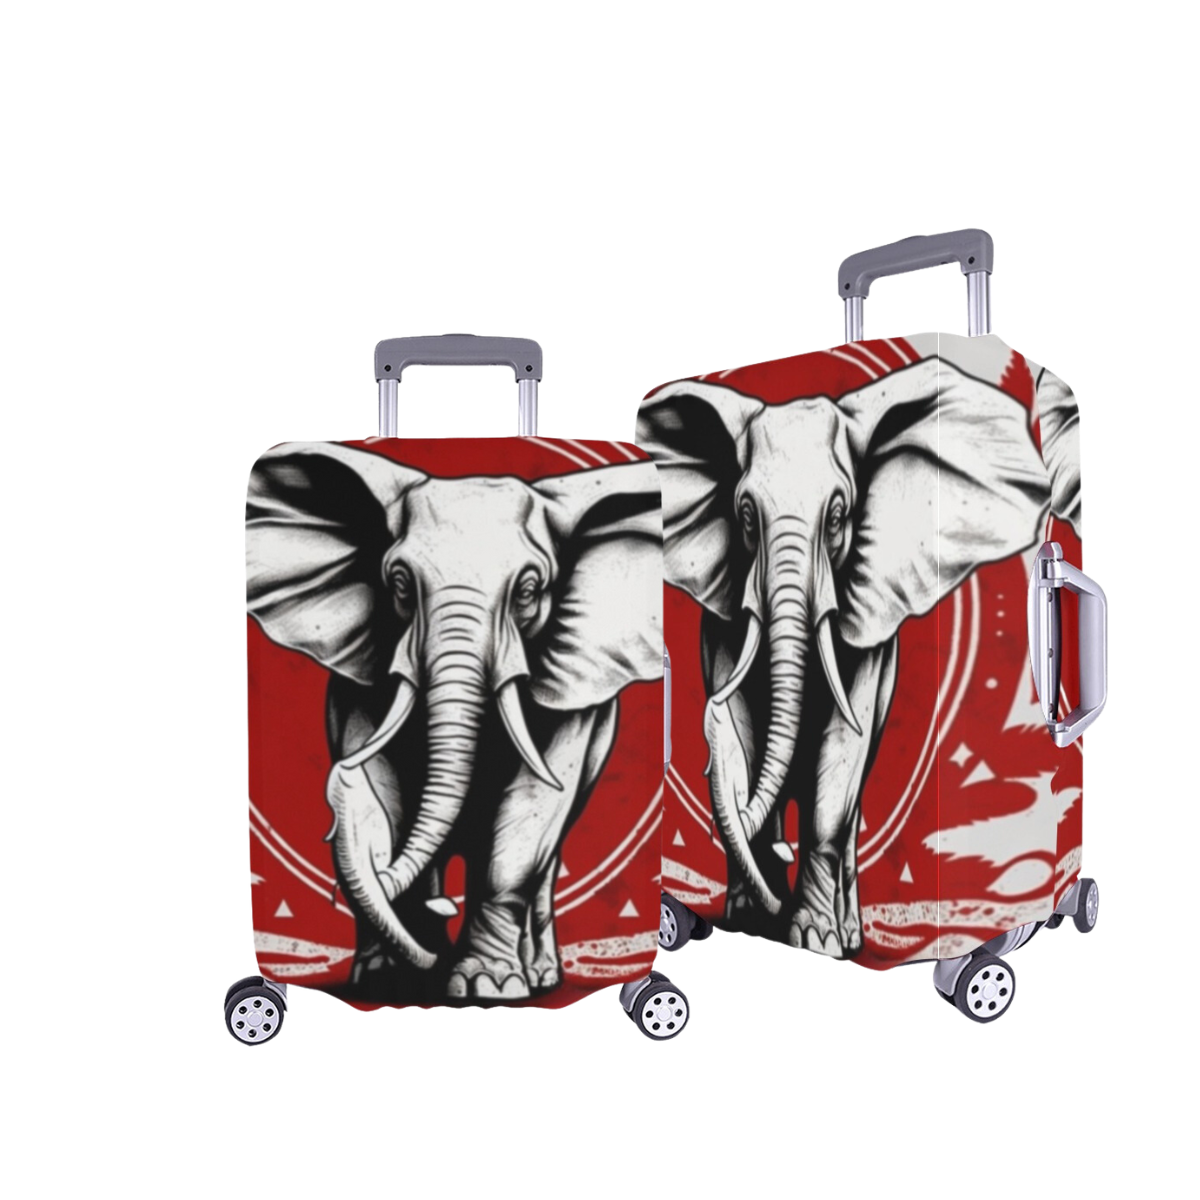 Trunks Up Luggage Cover